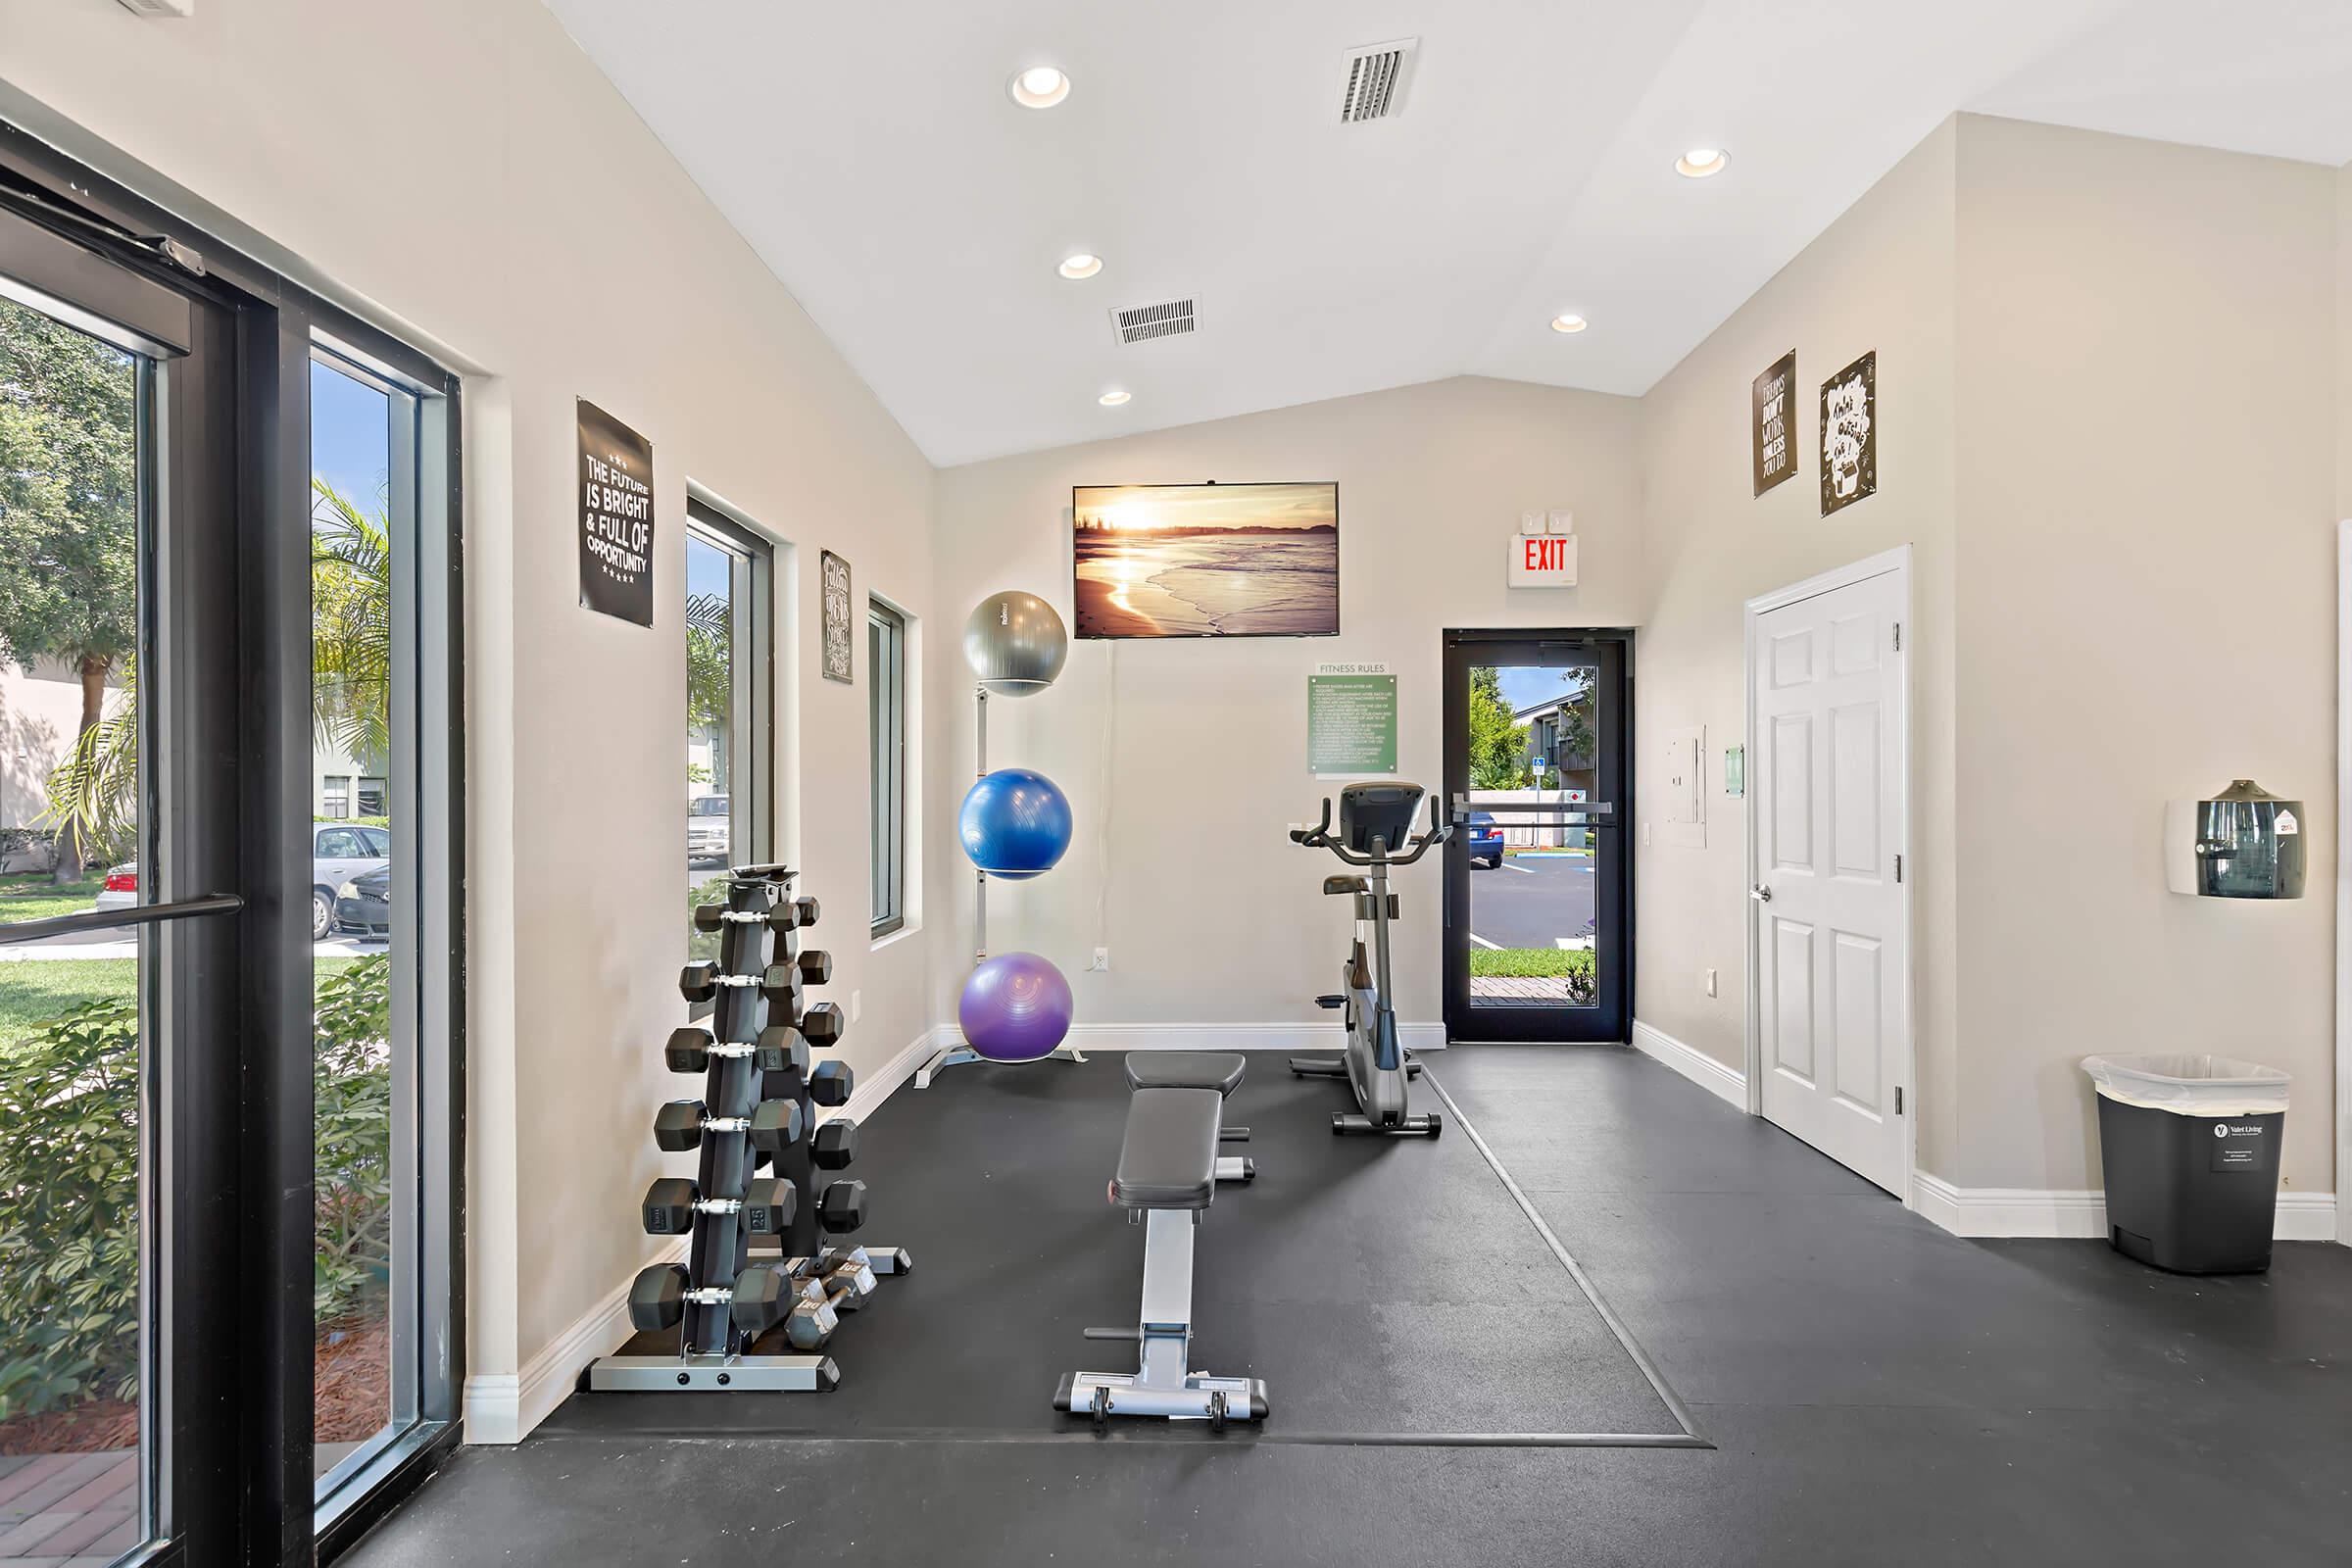 Enjoy Our-state-of-the-art Fitness Center At The Oasis at Bayside in Largo, FL